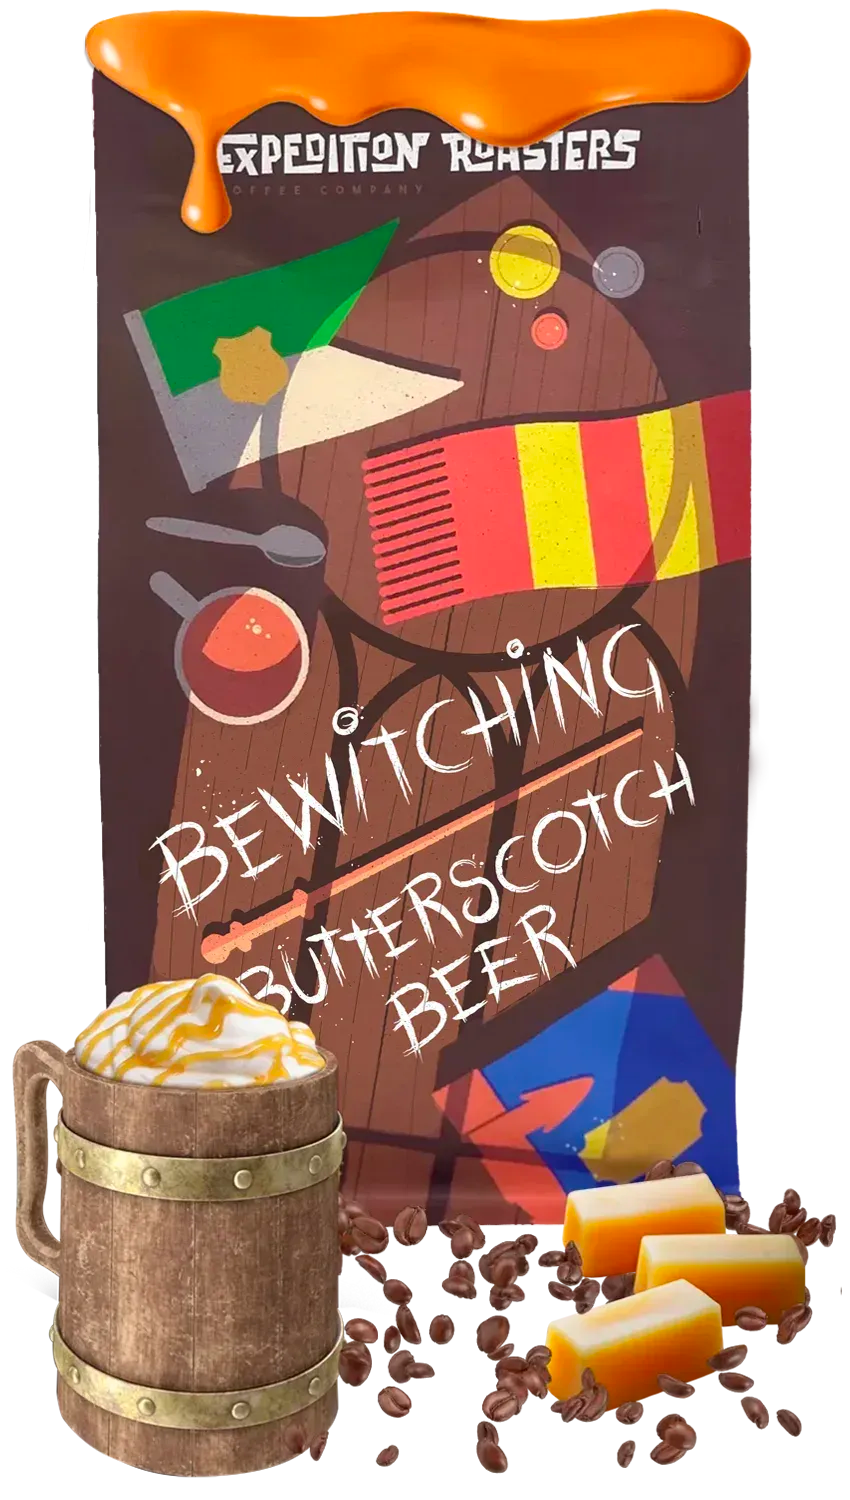 Bewitching Butterscotch Beer